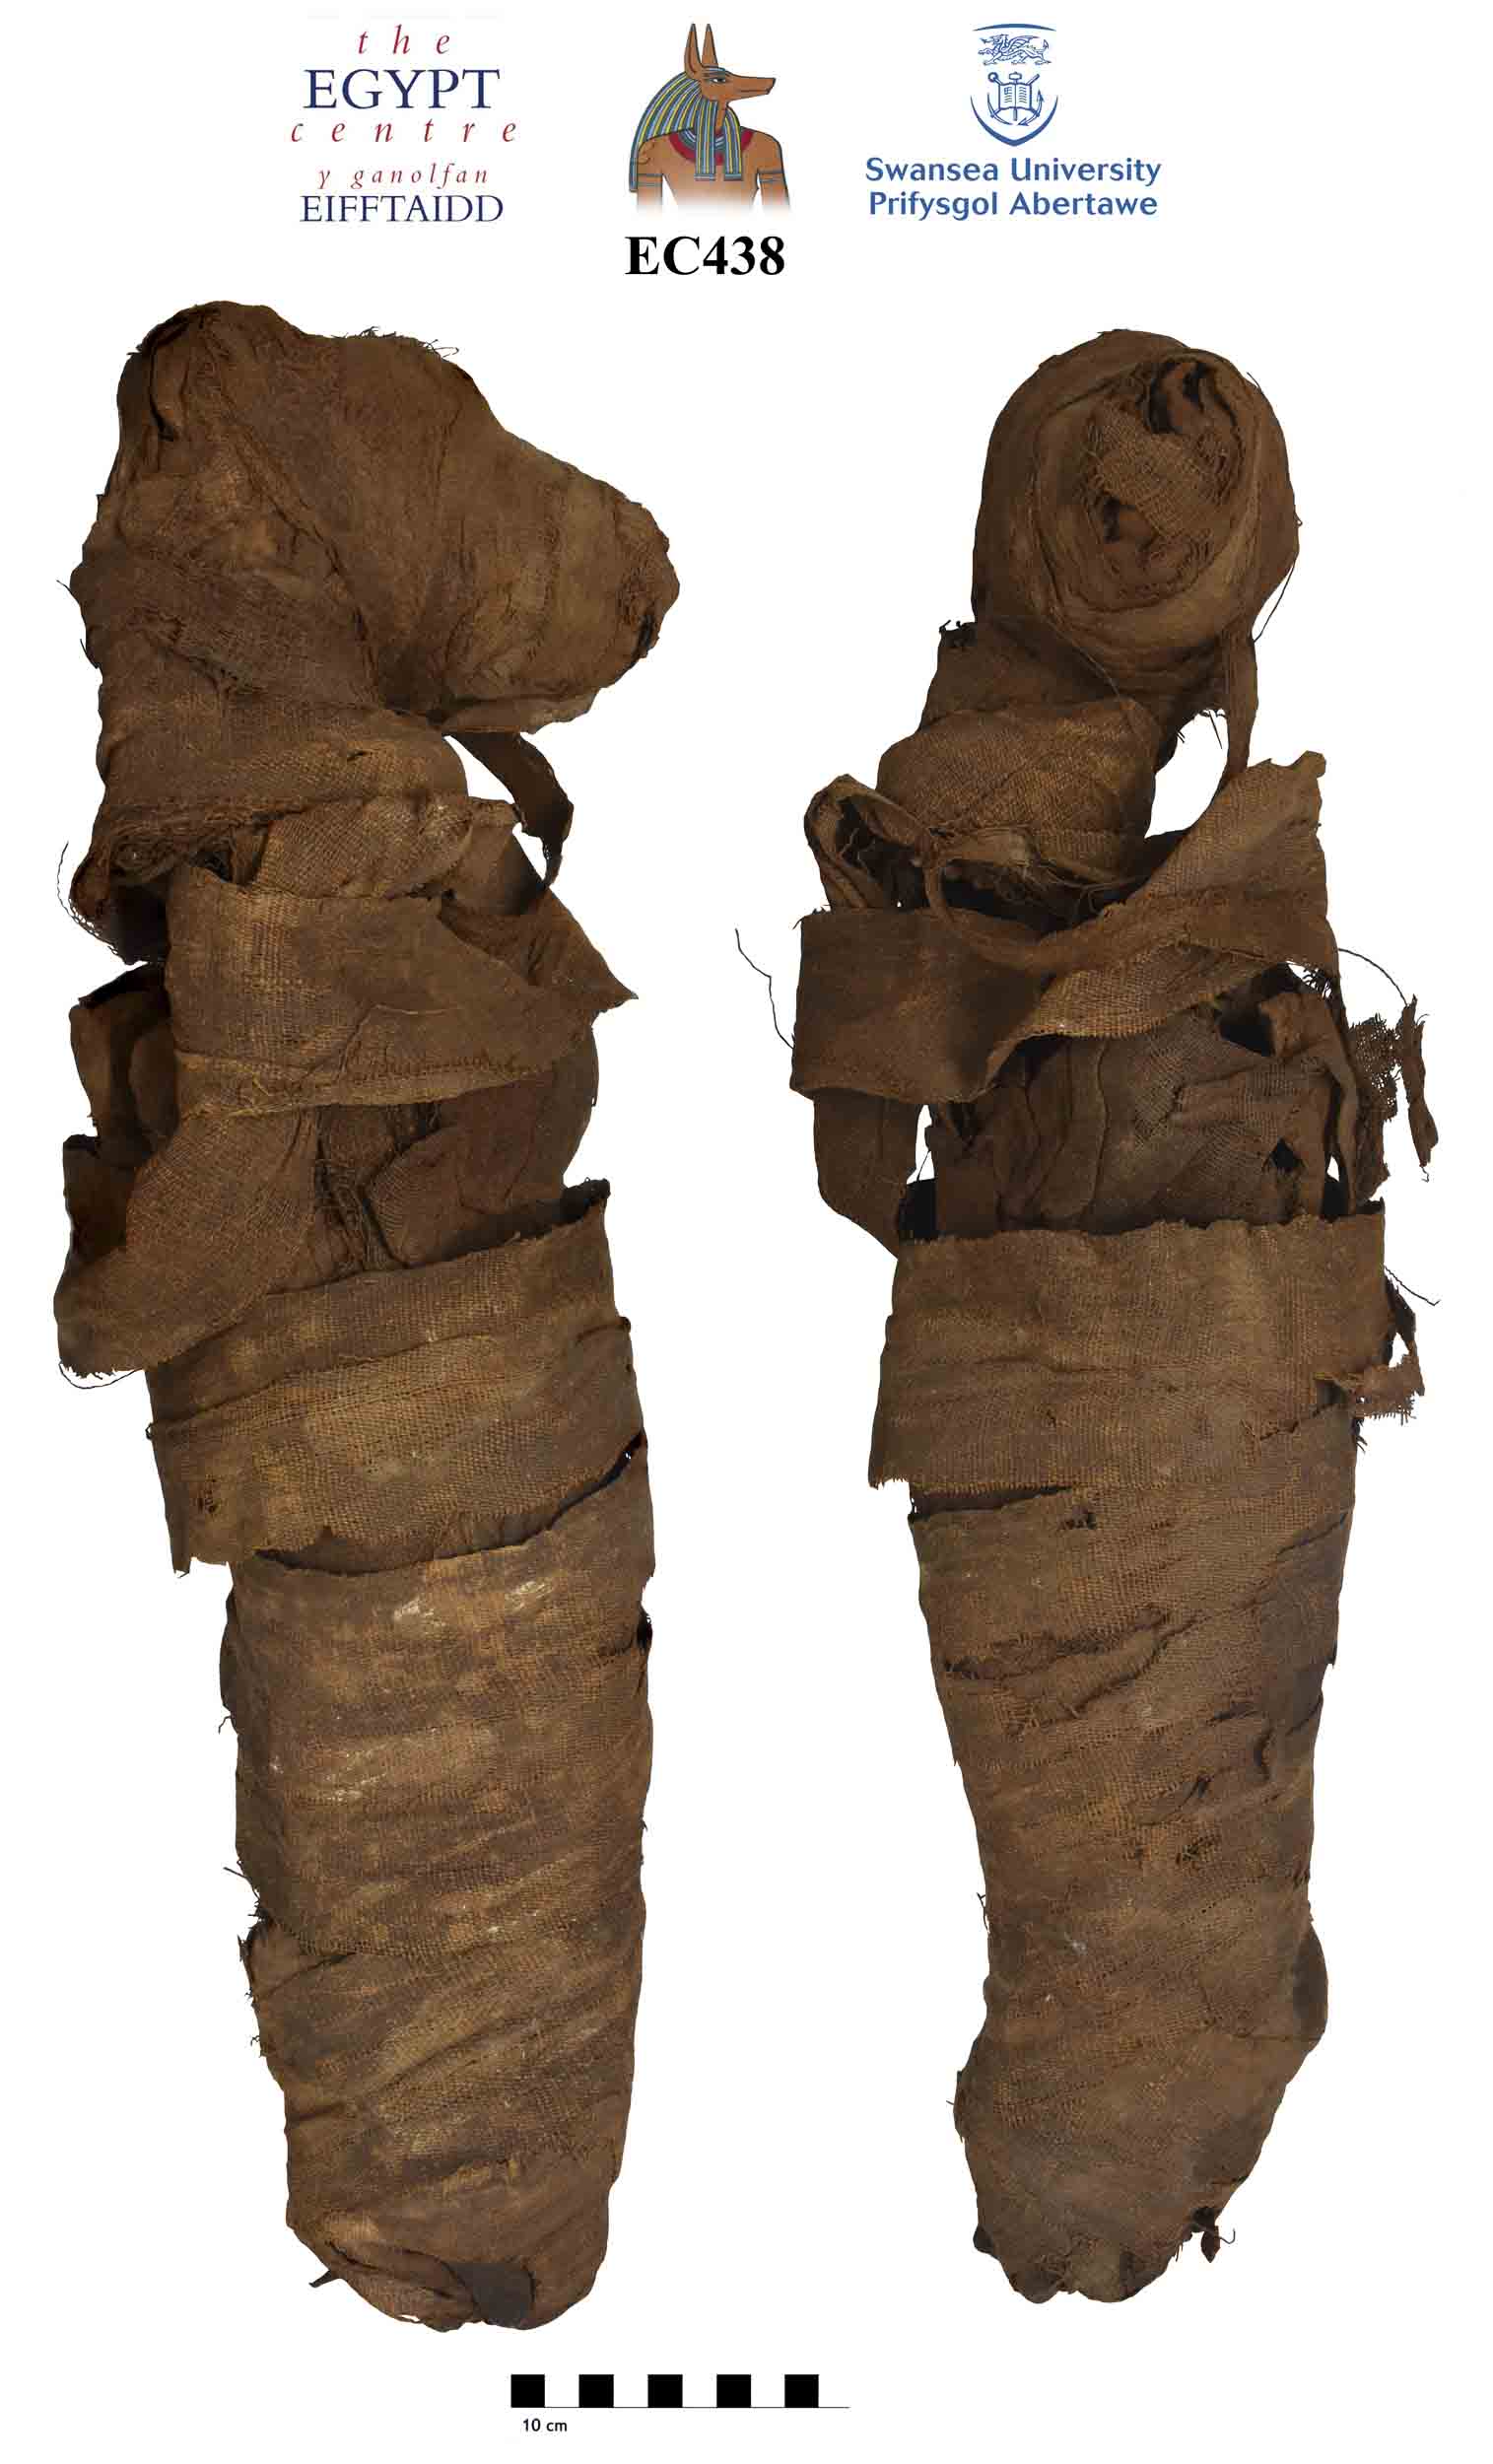 Image for: Mummified remains, possibly of a dog